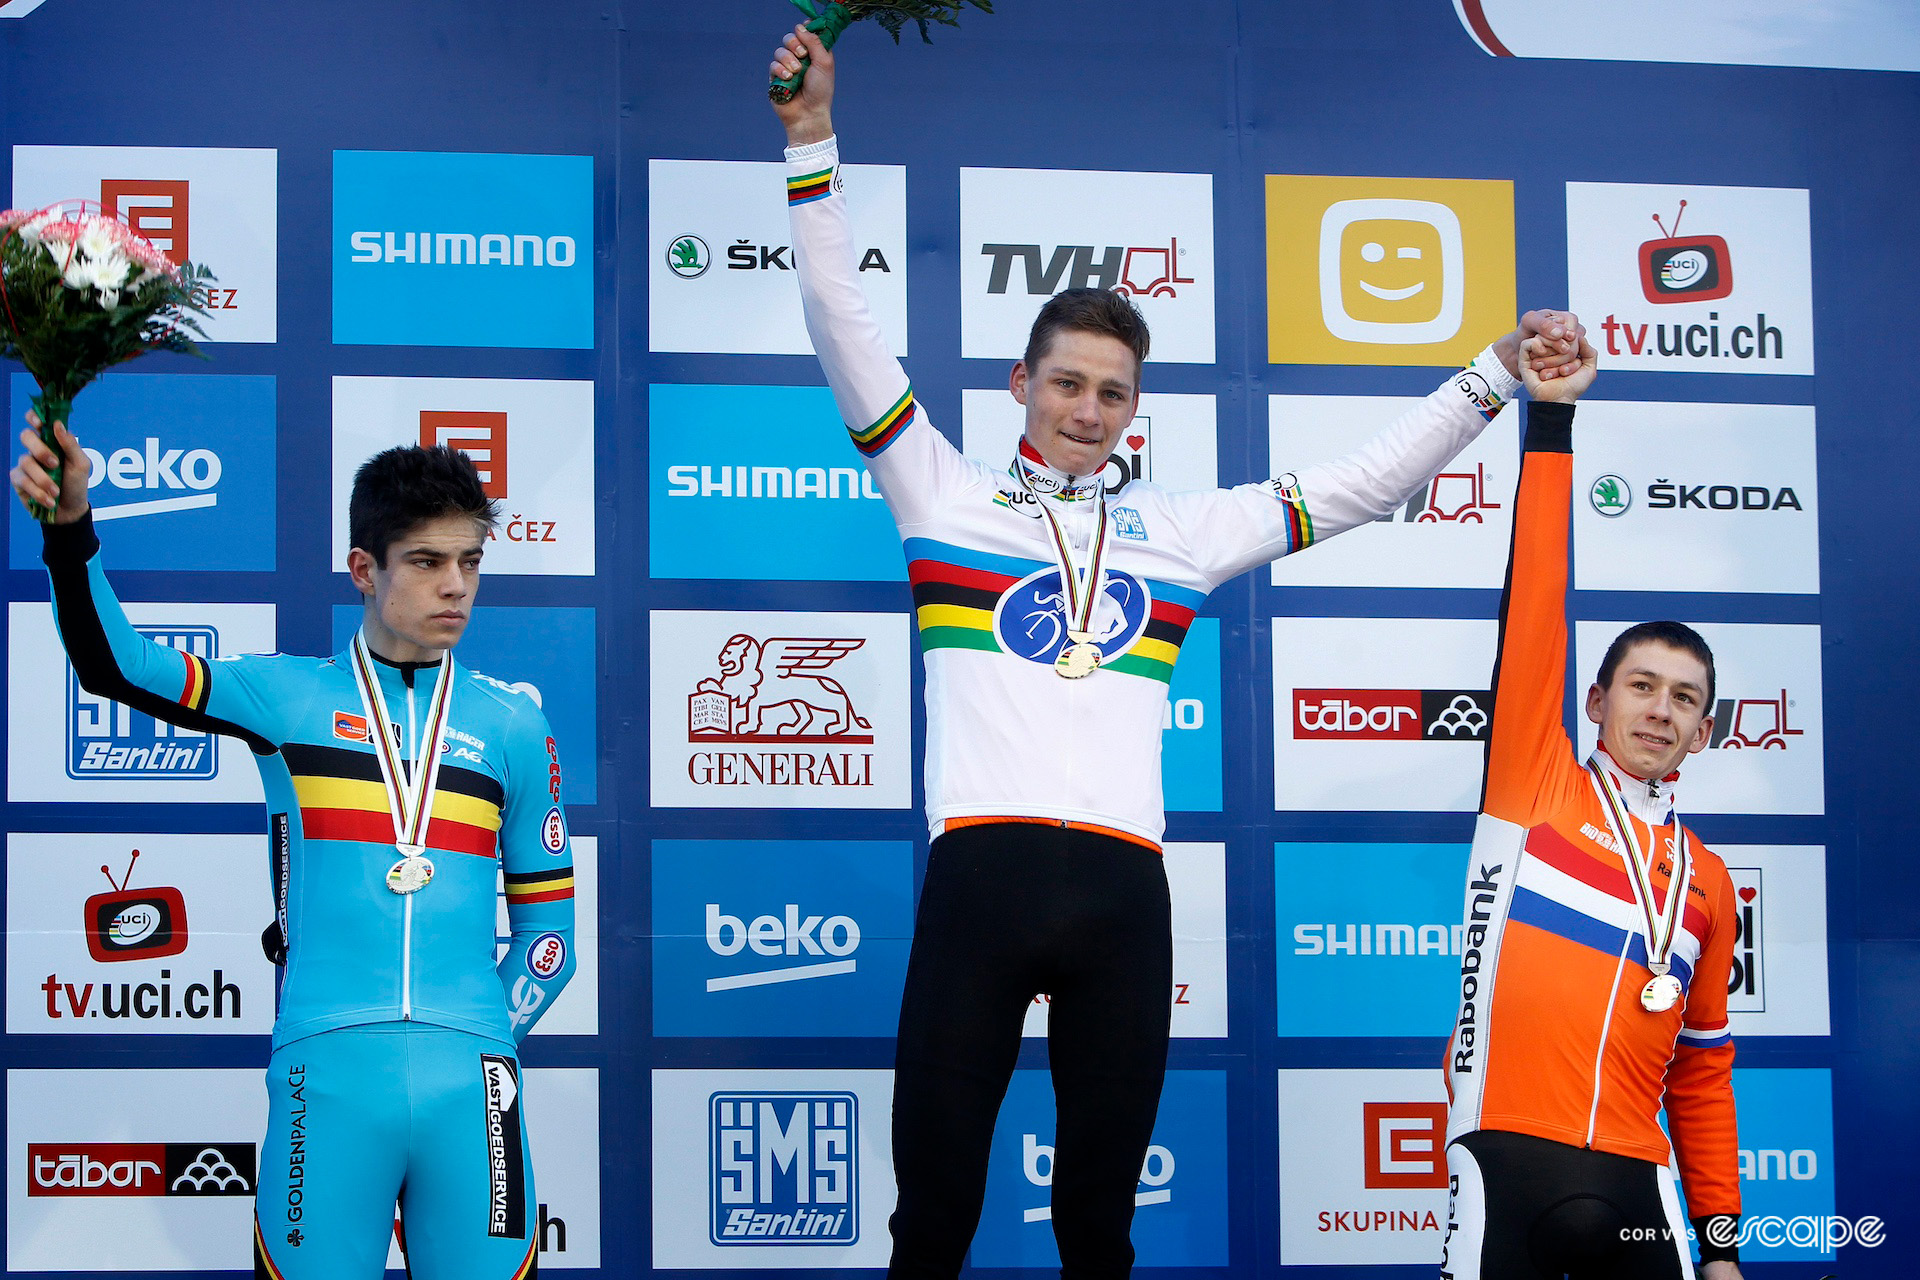 Mathieu van der Poel flanked by second-place Wout van Aert and third Lars van der Haar on the elite men's podium at the 2015 Cyclocross World Championships in Tábor.